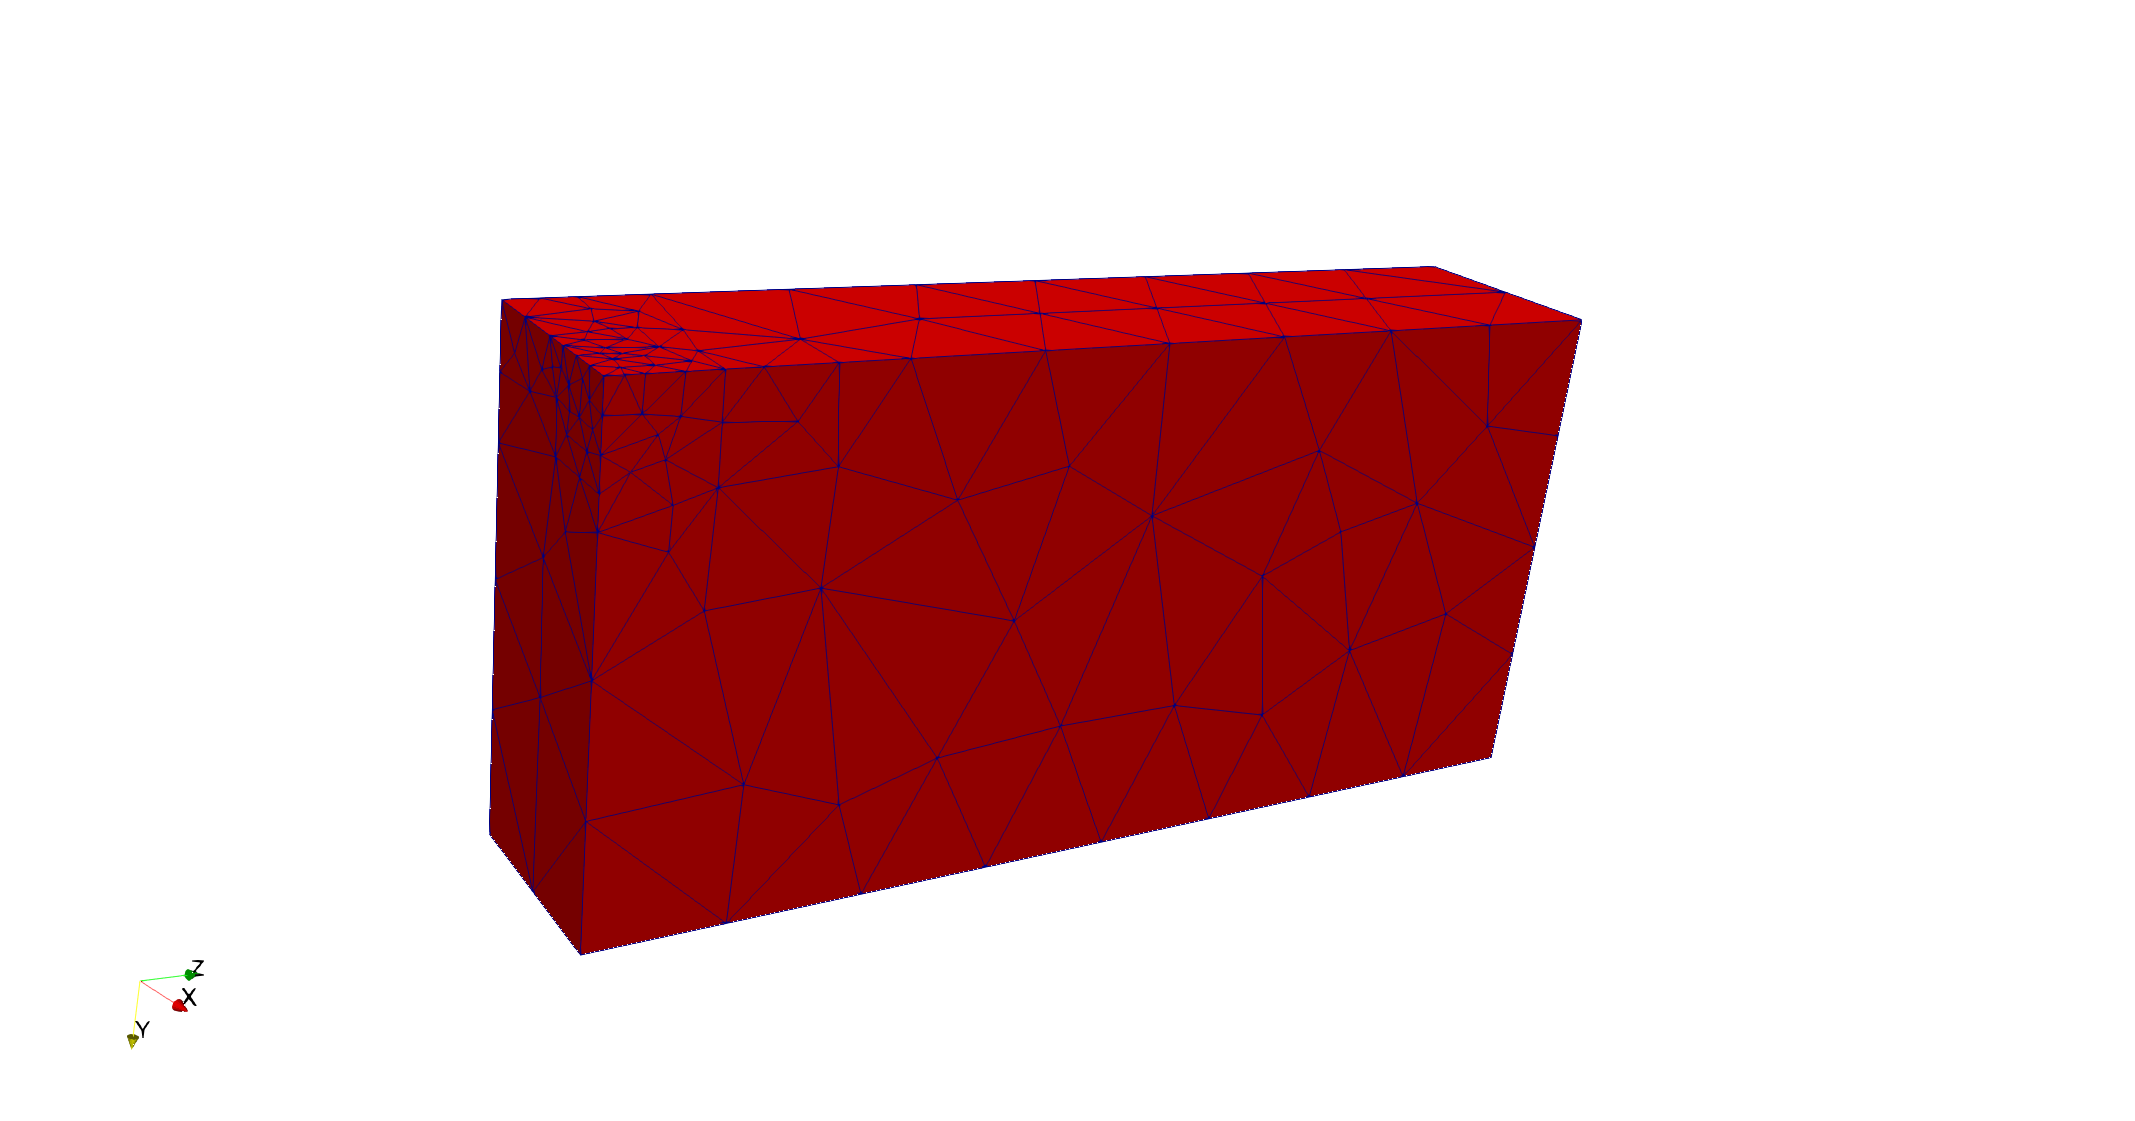 File:cdt3d_constrained_surface_535_tets.png